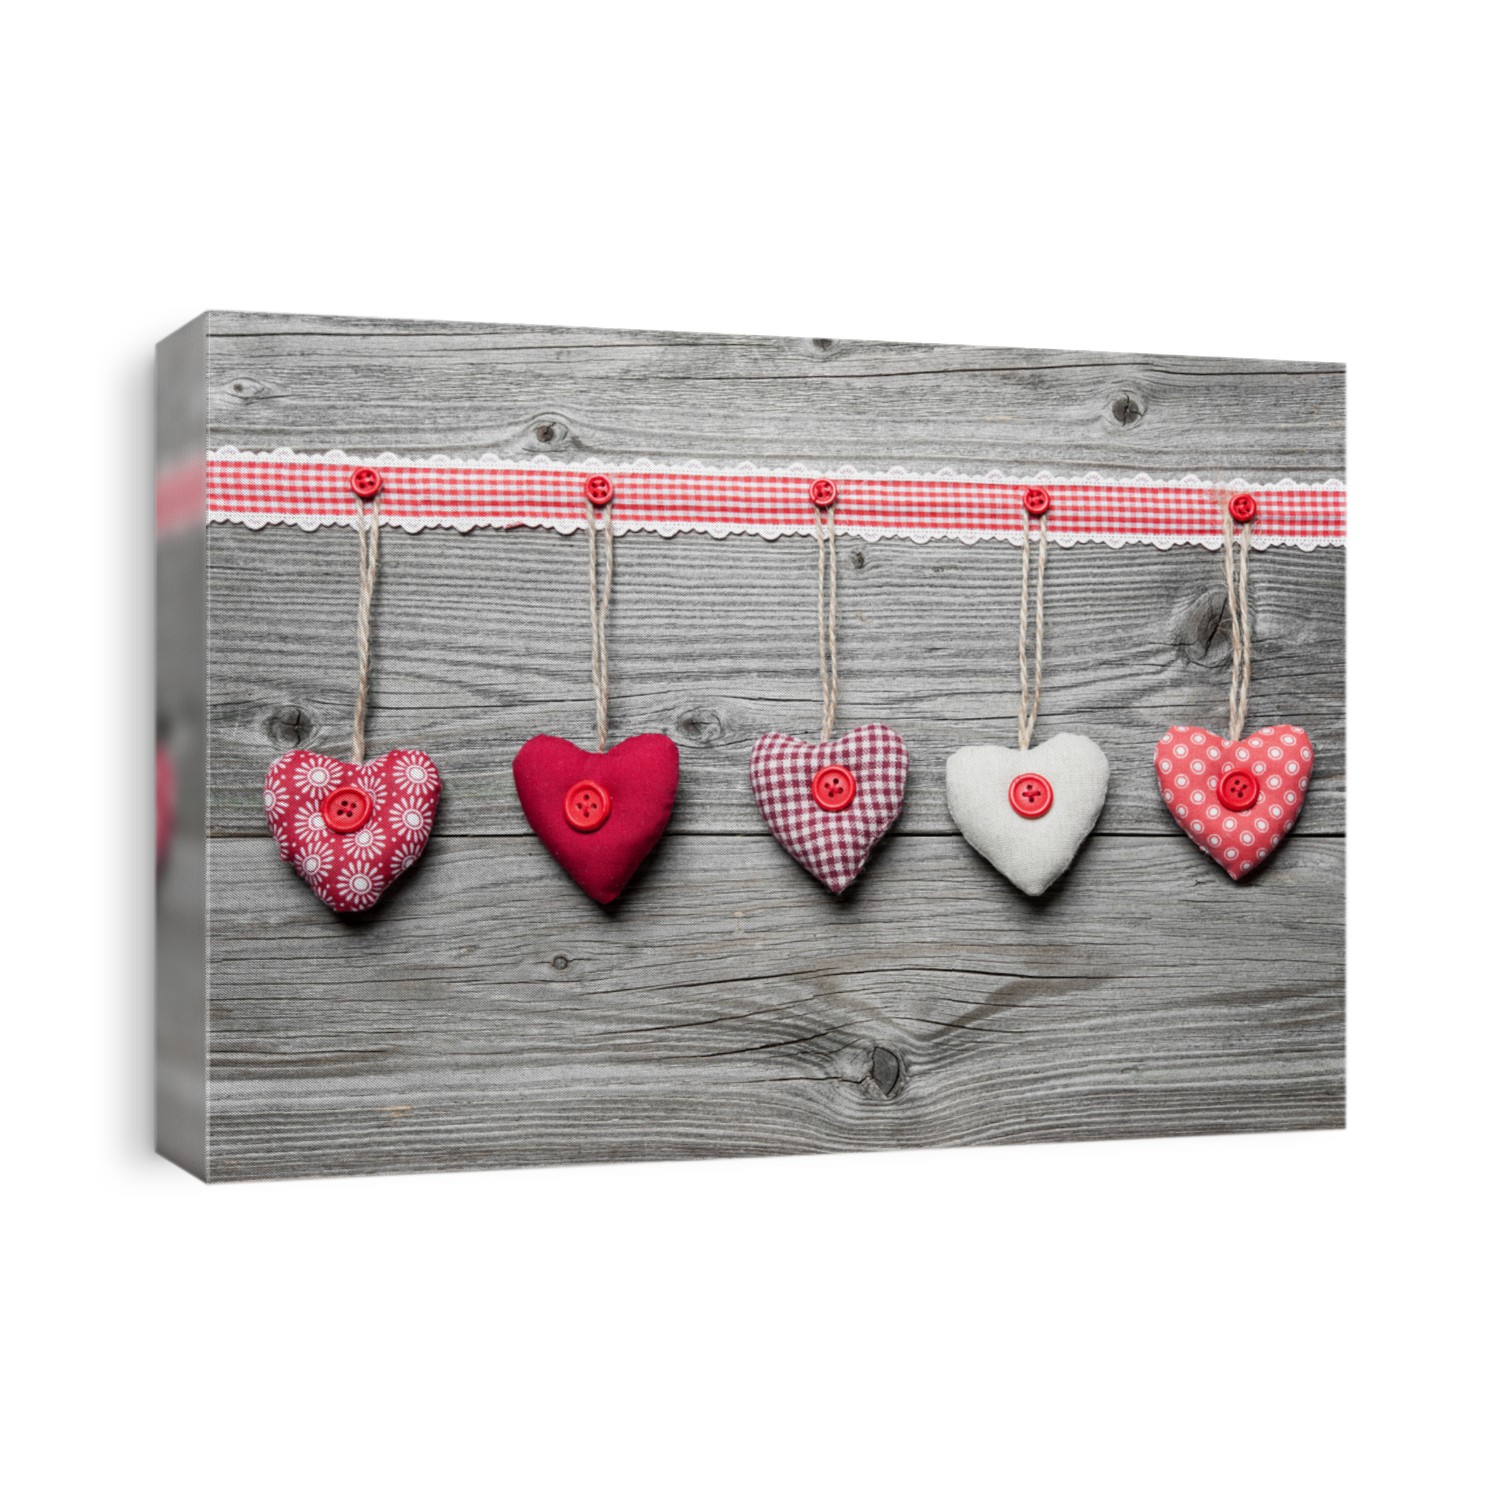 Red hearts hanging over rustic wooden planks. Valentines Day background